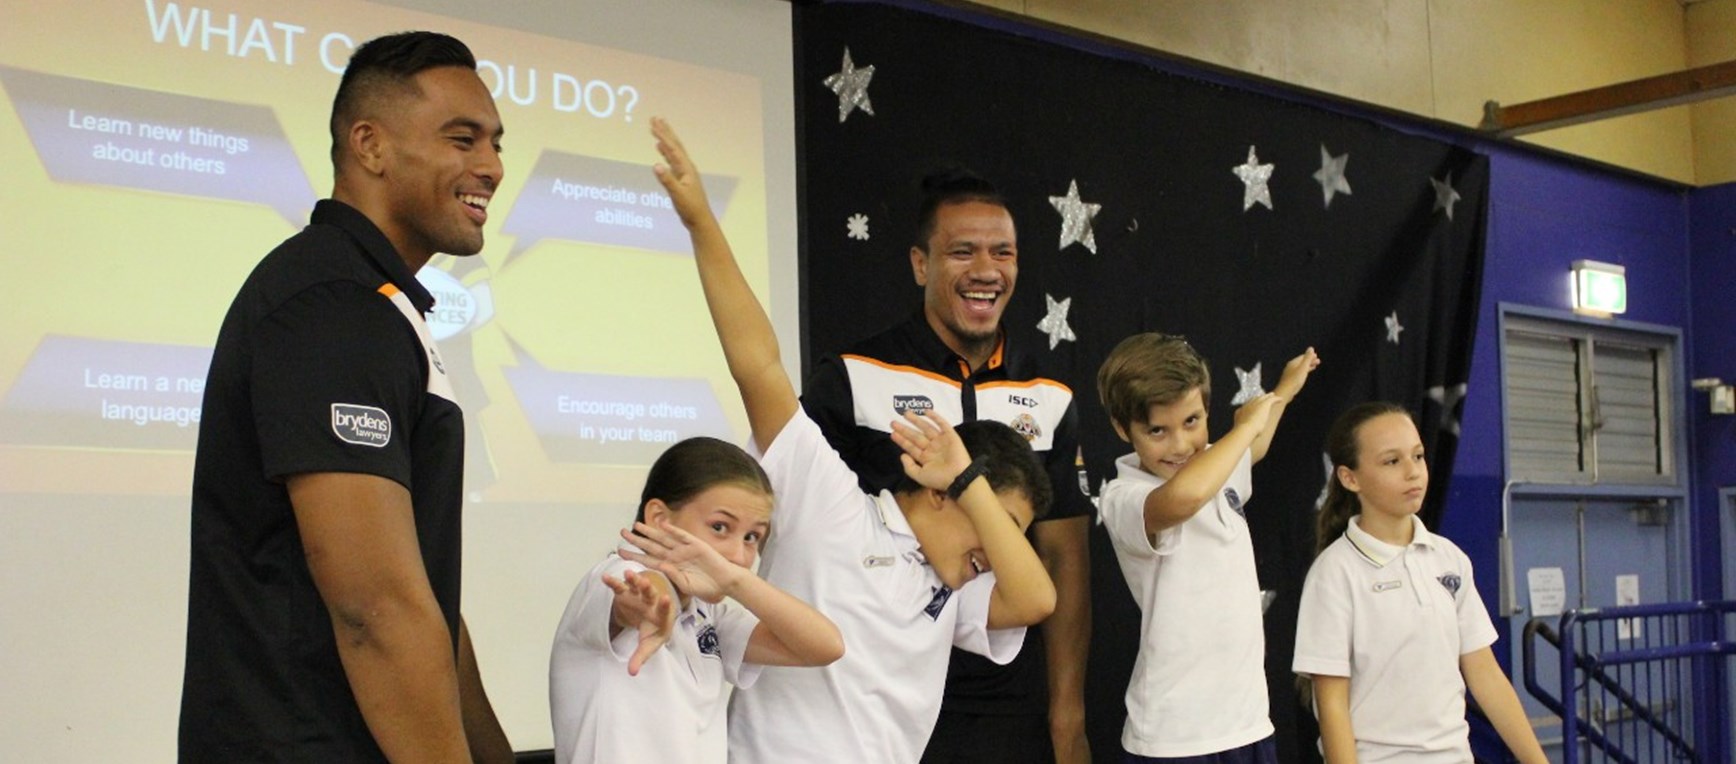 Gallery: Wests Tigers Campbelltown Community Carnival